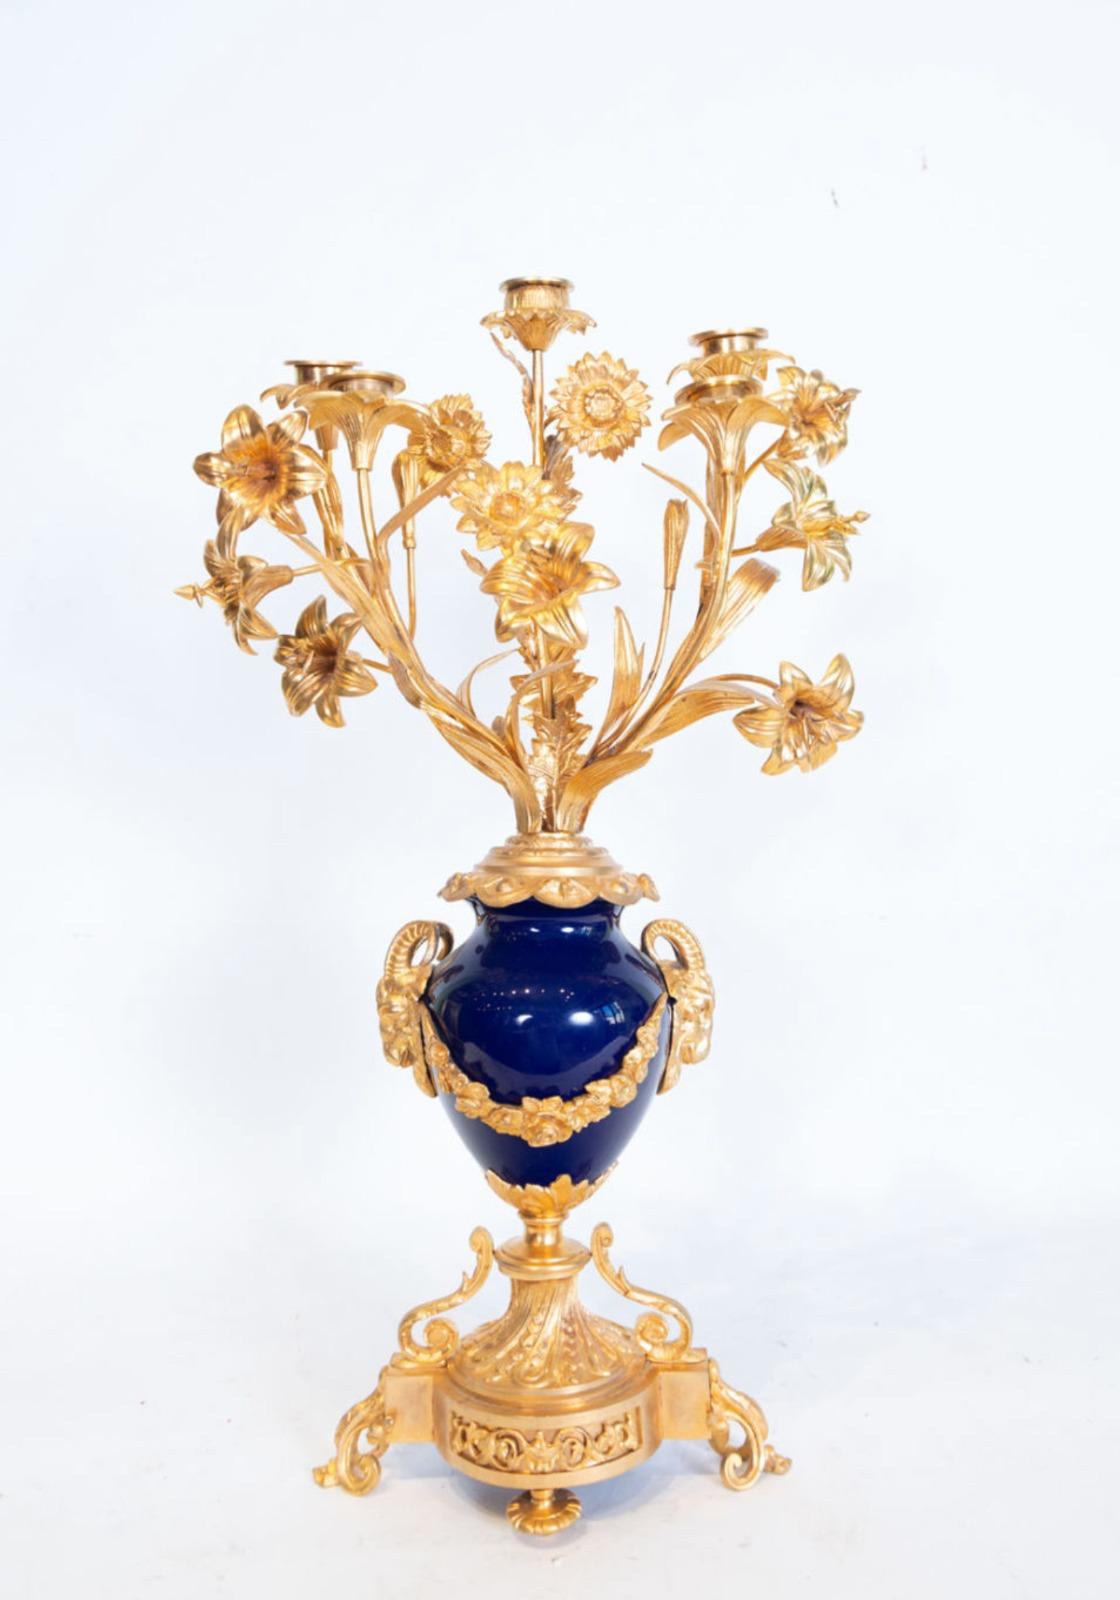 Napoleon III Important French Gilt Bronze and Porcelain Garniture from Sèvres 19th Century For Sale